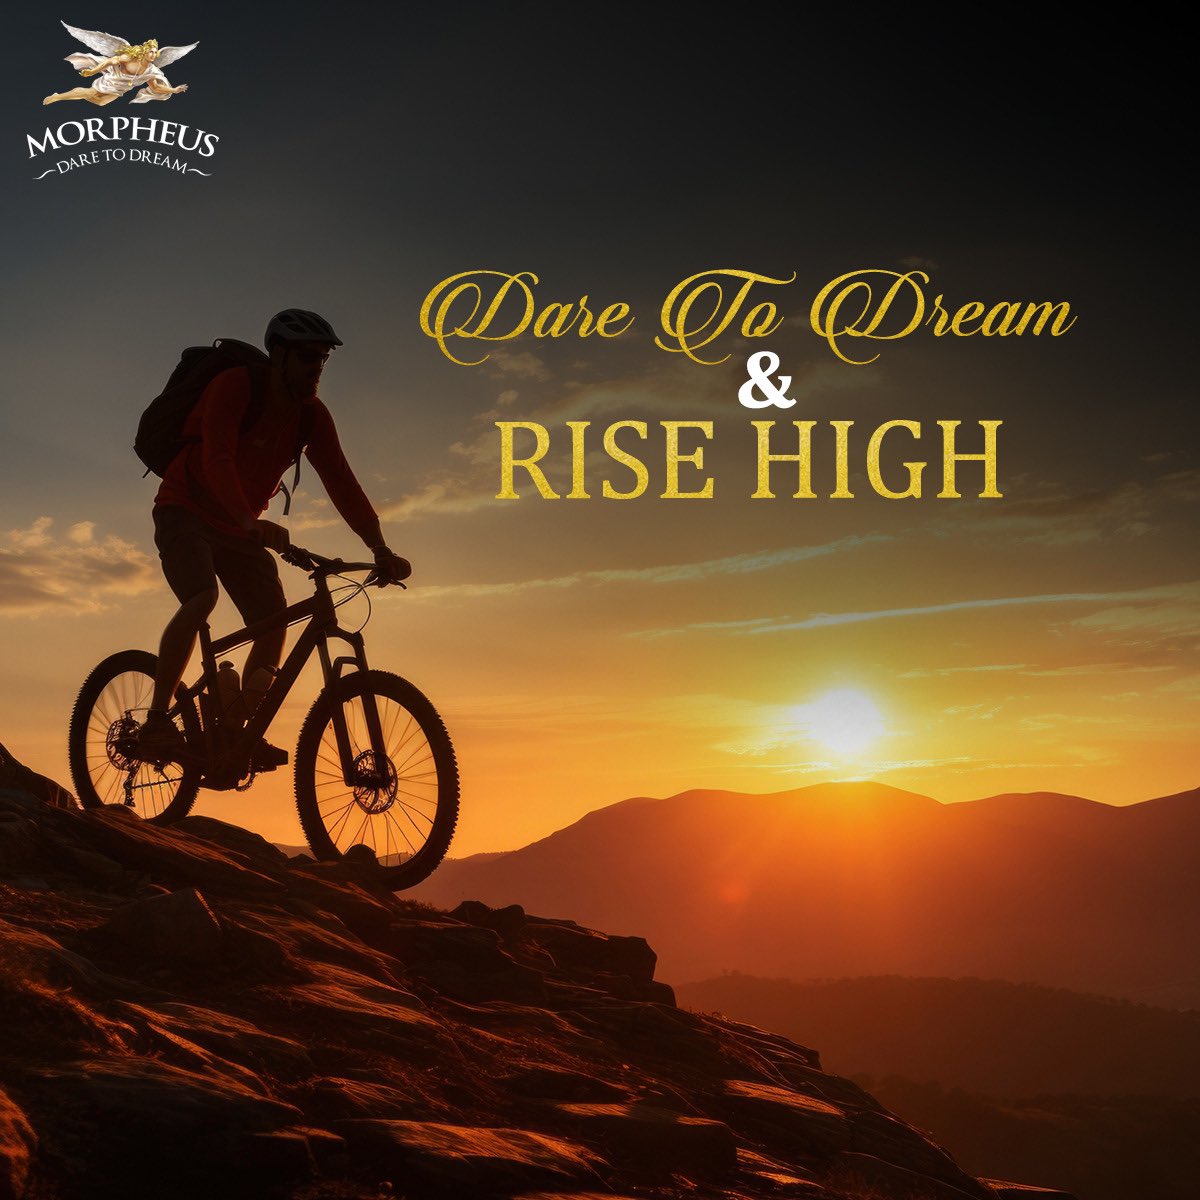 Rise above odds and soar with a Dare To Dream spirit.

#MorpheusBrandy #MorpheusXOBrandy #Brandy #MorpheusDareToDream #DareToDream #LargestSellingBrandy